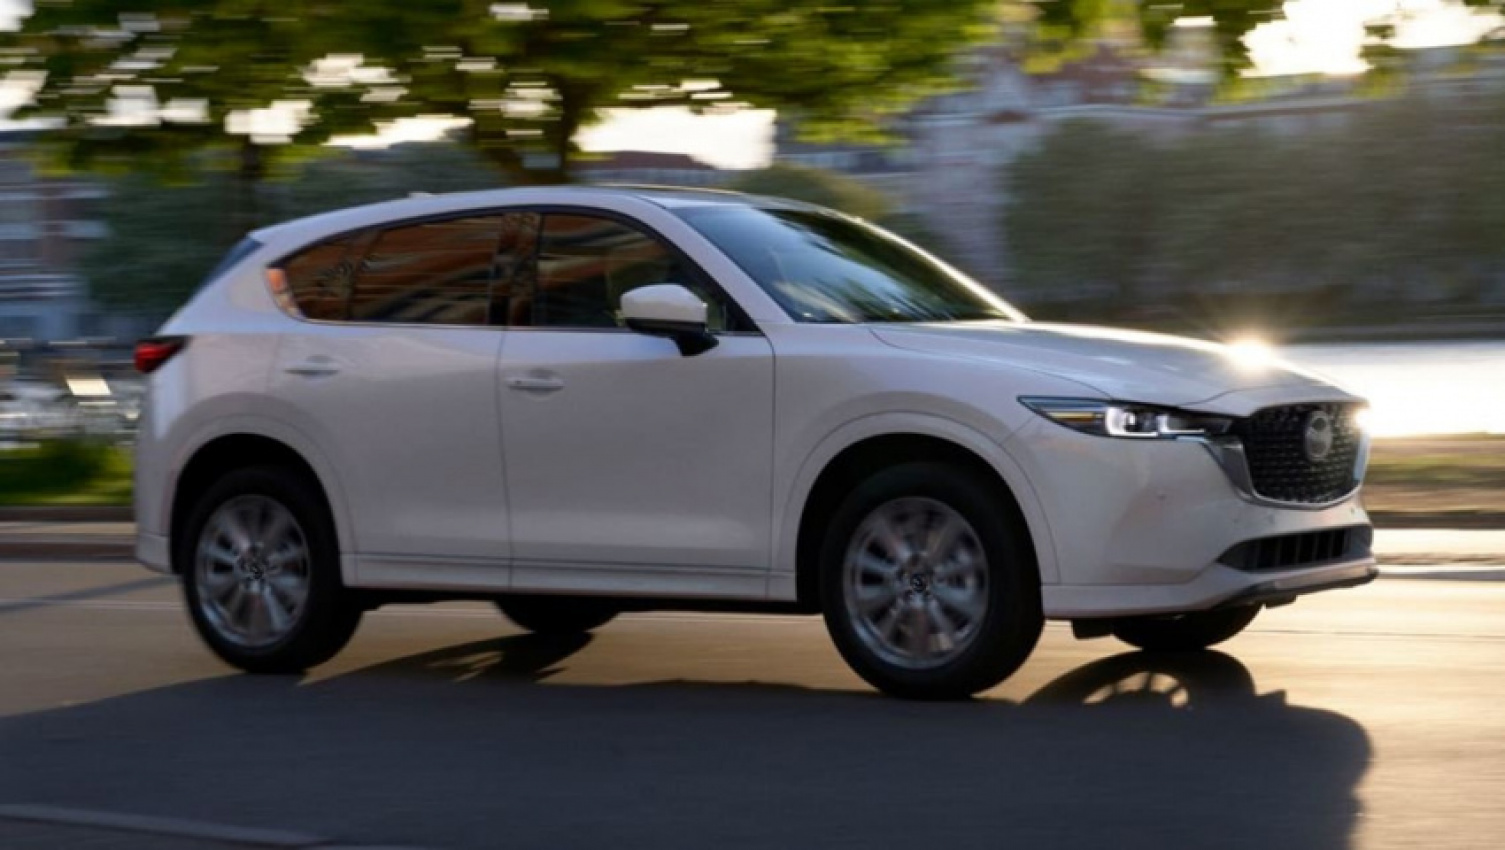 autos, cars, mazda, subaru, toyota, industry news, mazda cx-5, mazda cx-5 2022, mazda news, mazda suv range, showroom news, subaru forester, toyota news, toyota rav4, toyota rav4 2022, toyota suv range, 2022 mazda cx-5 powers past toyota rav4 in 2022 sales race! rav4 also finishes behind subaru forester in january as steady supply gives cx-5 serious momentum